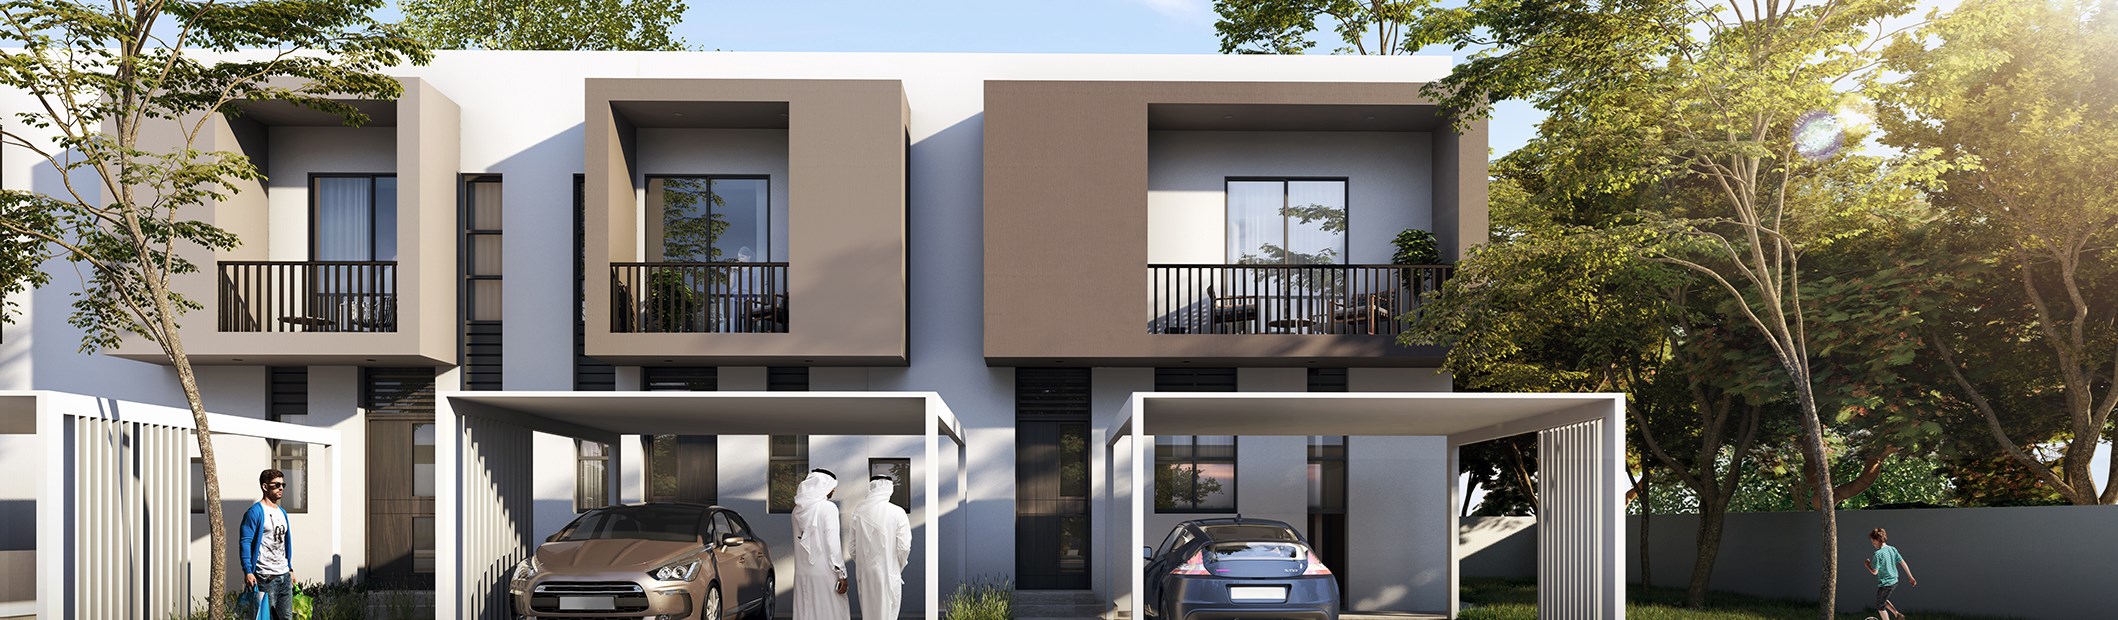 Arada introduces the Bareem Townhouses at Nasma Residences, as Phase 4 sales get under way